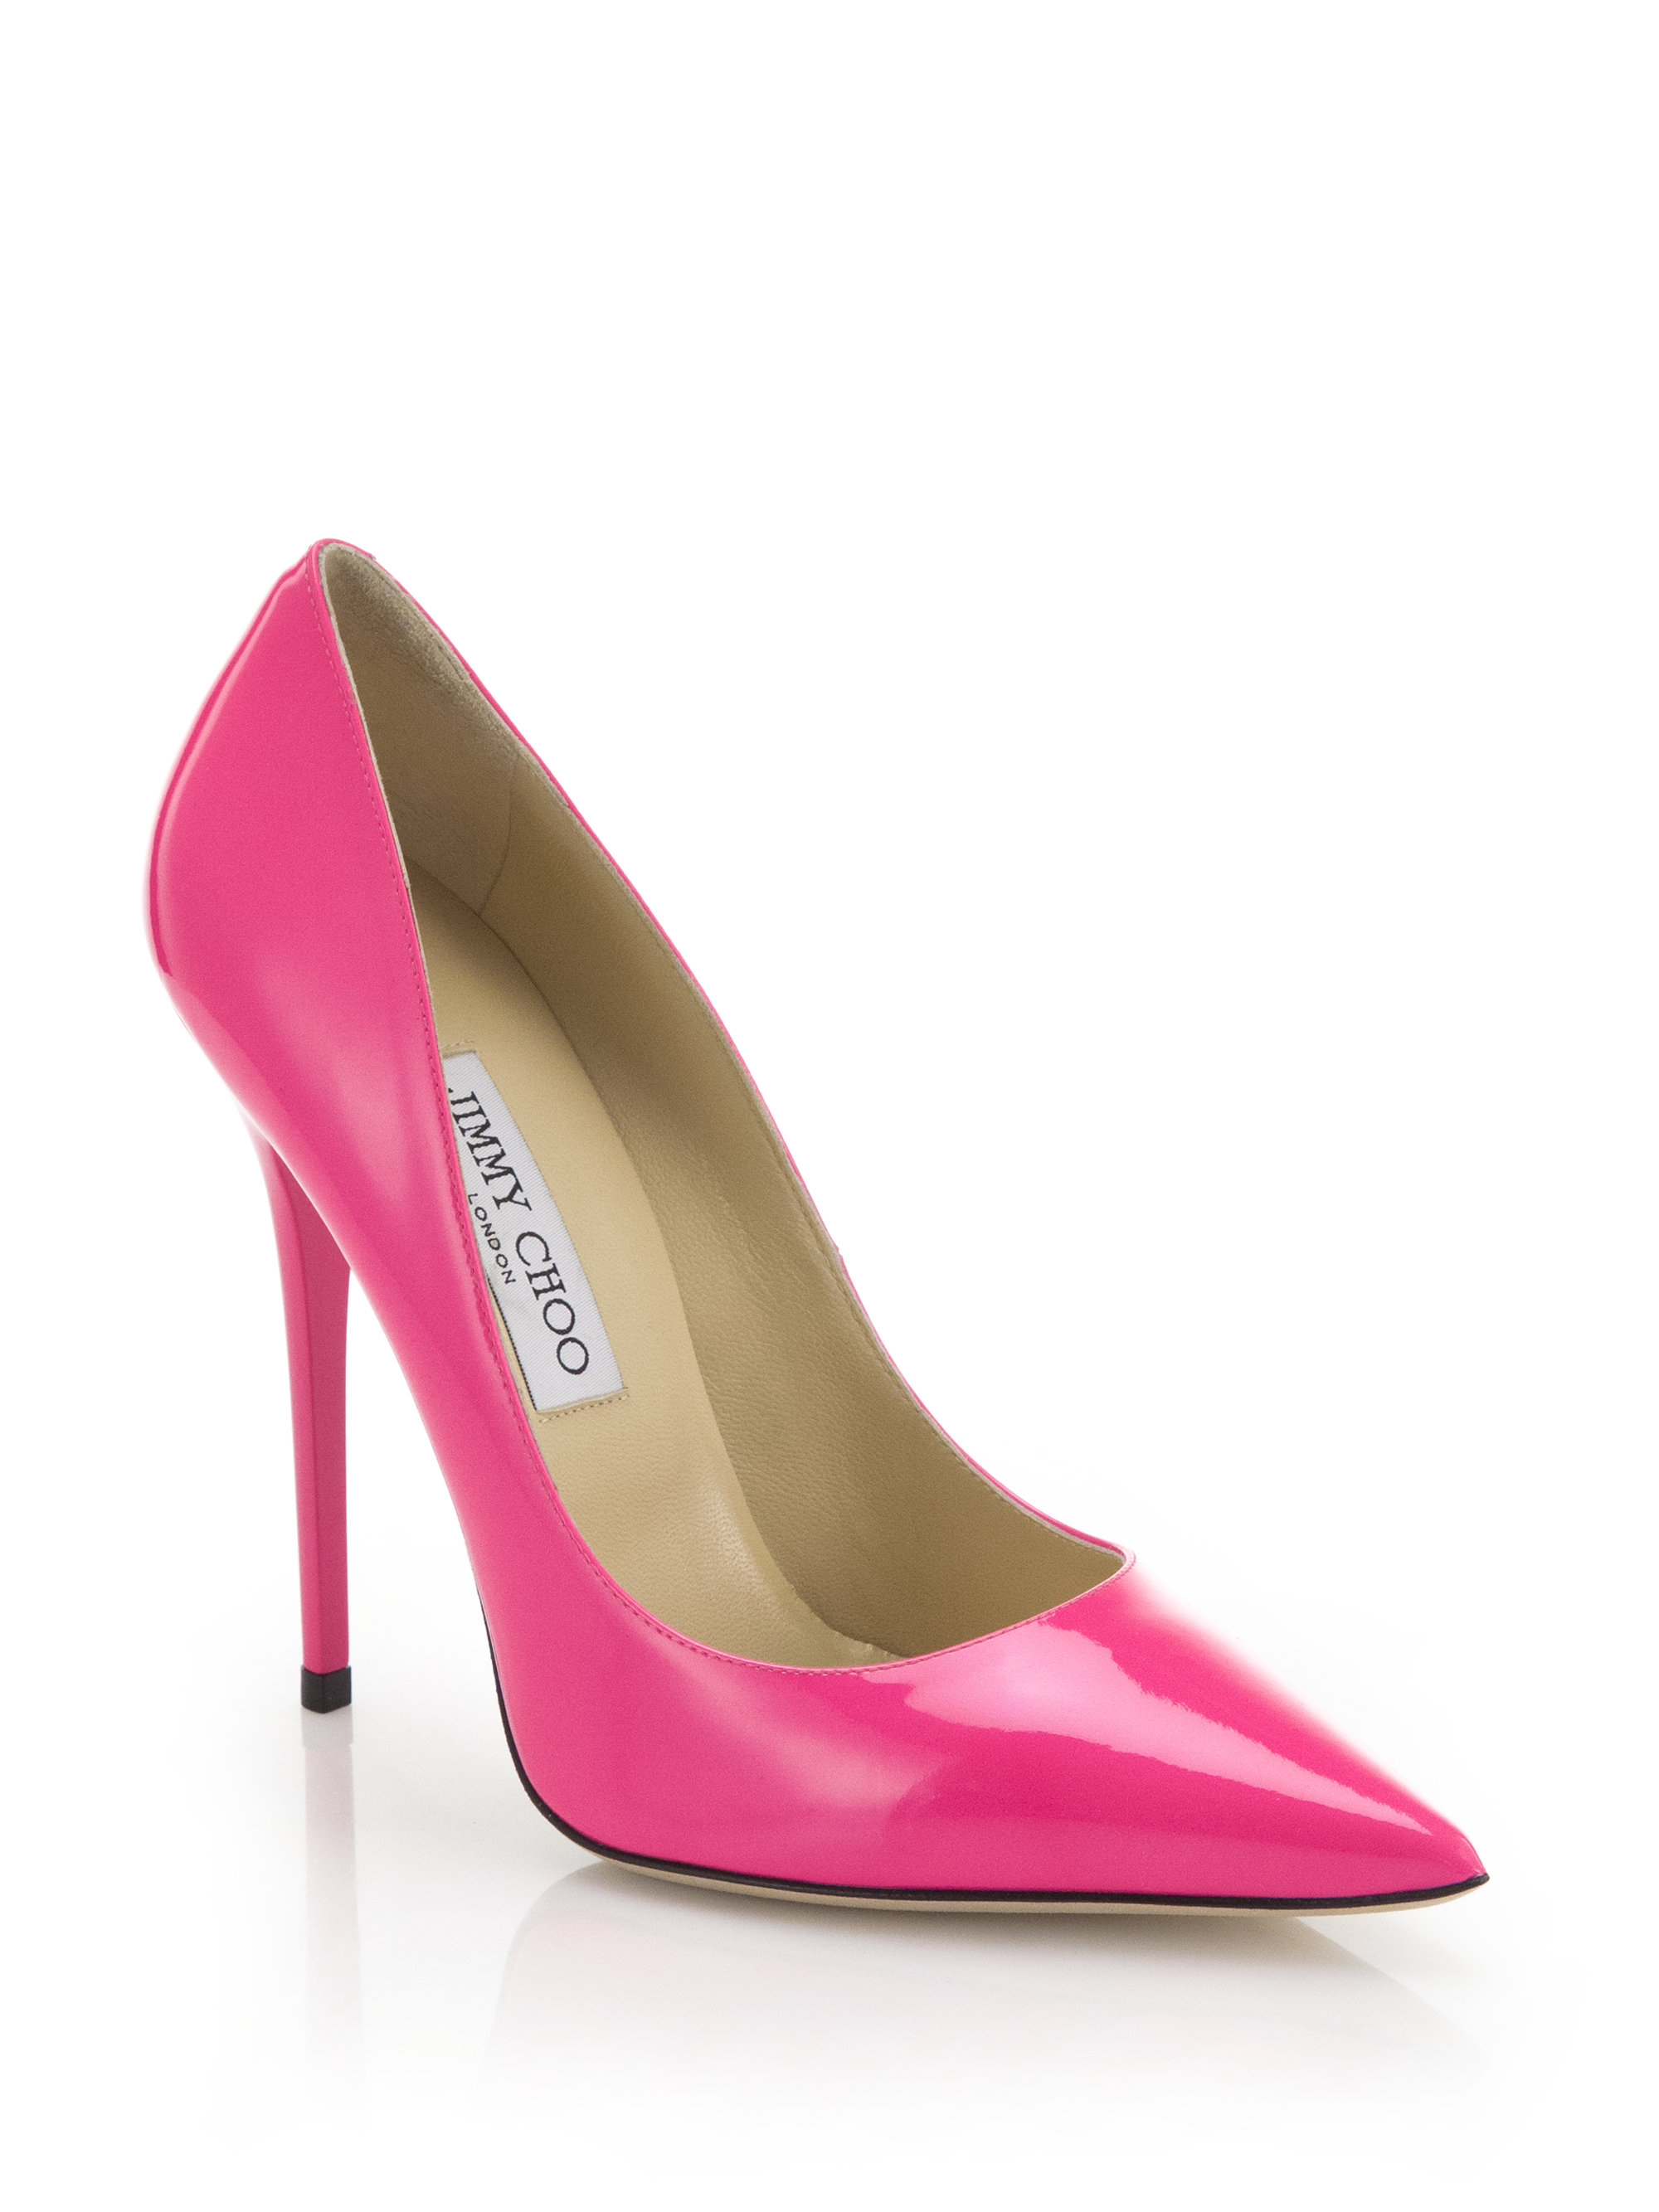 Jimmy Choo Anouk Patent Leather Pumps in Pink | Lyst